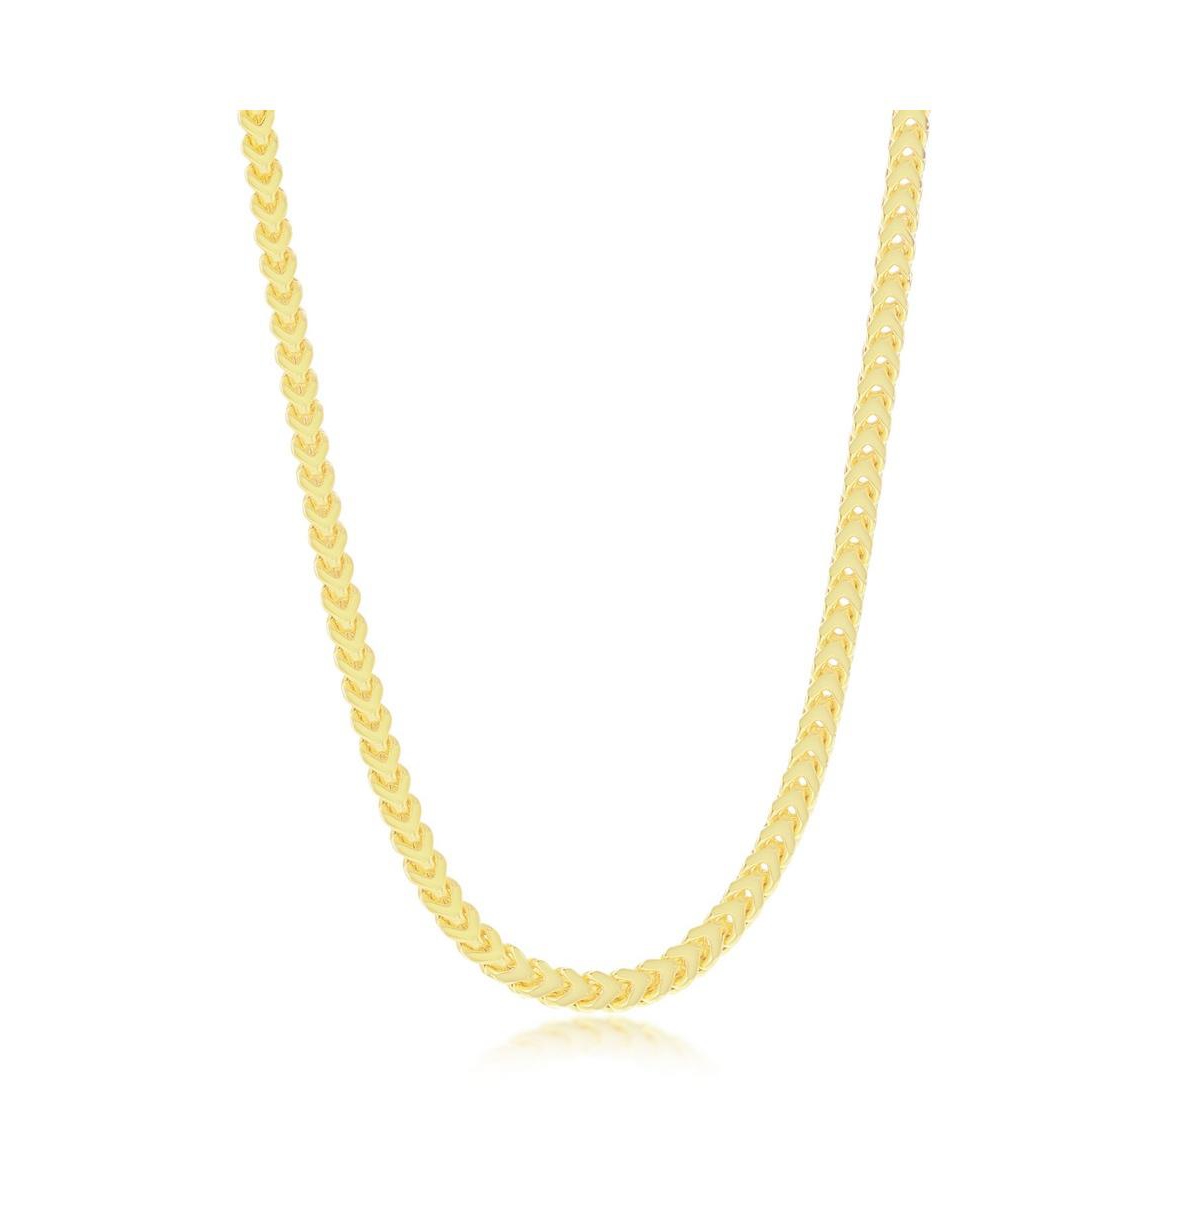 Franco Chain 3mm Sterling Silver or Gold Plated Over Sterling Silver 22" Necklace - Gold